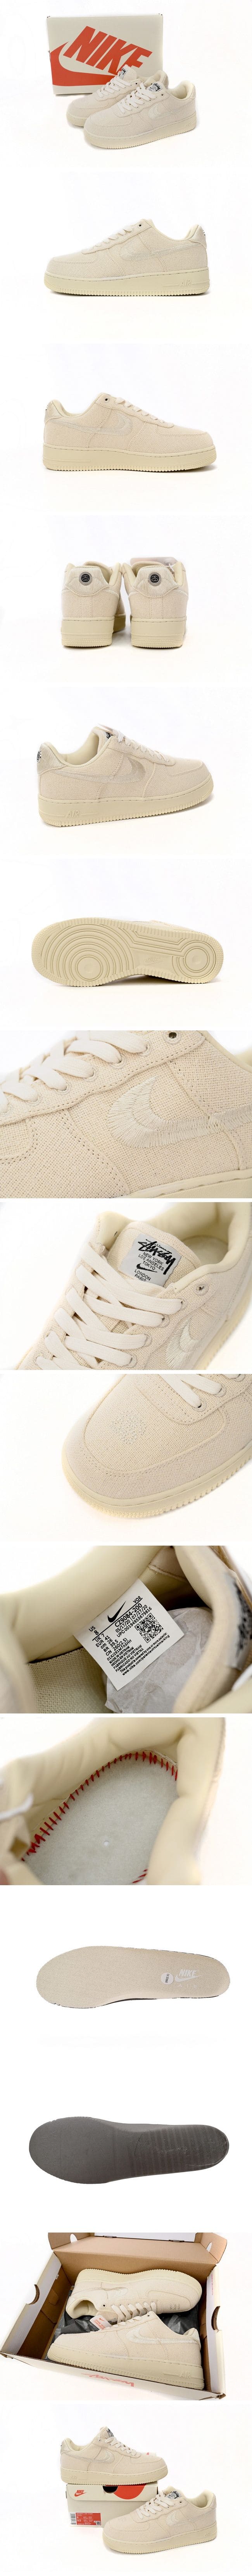 Stussy x Nike Air Force 1 Low Fossil Stone ステューシー × ナイキ エアフォース1 ロー フォッシルストーン